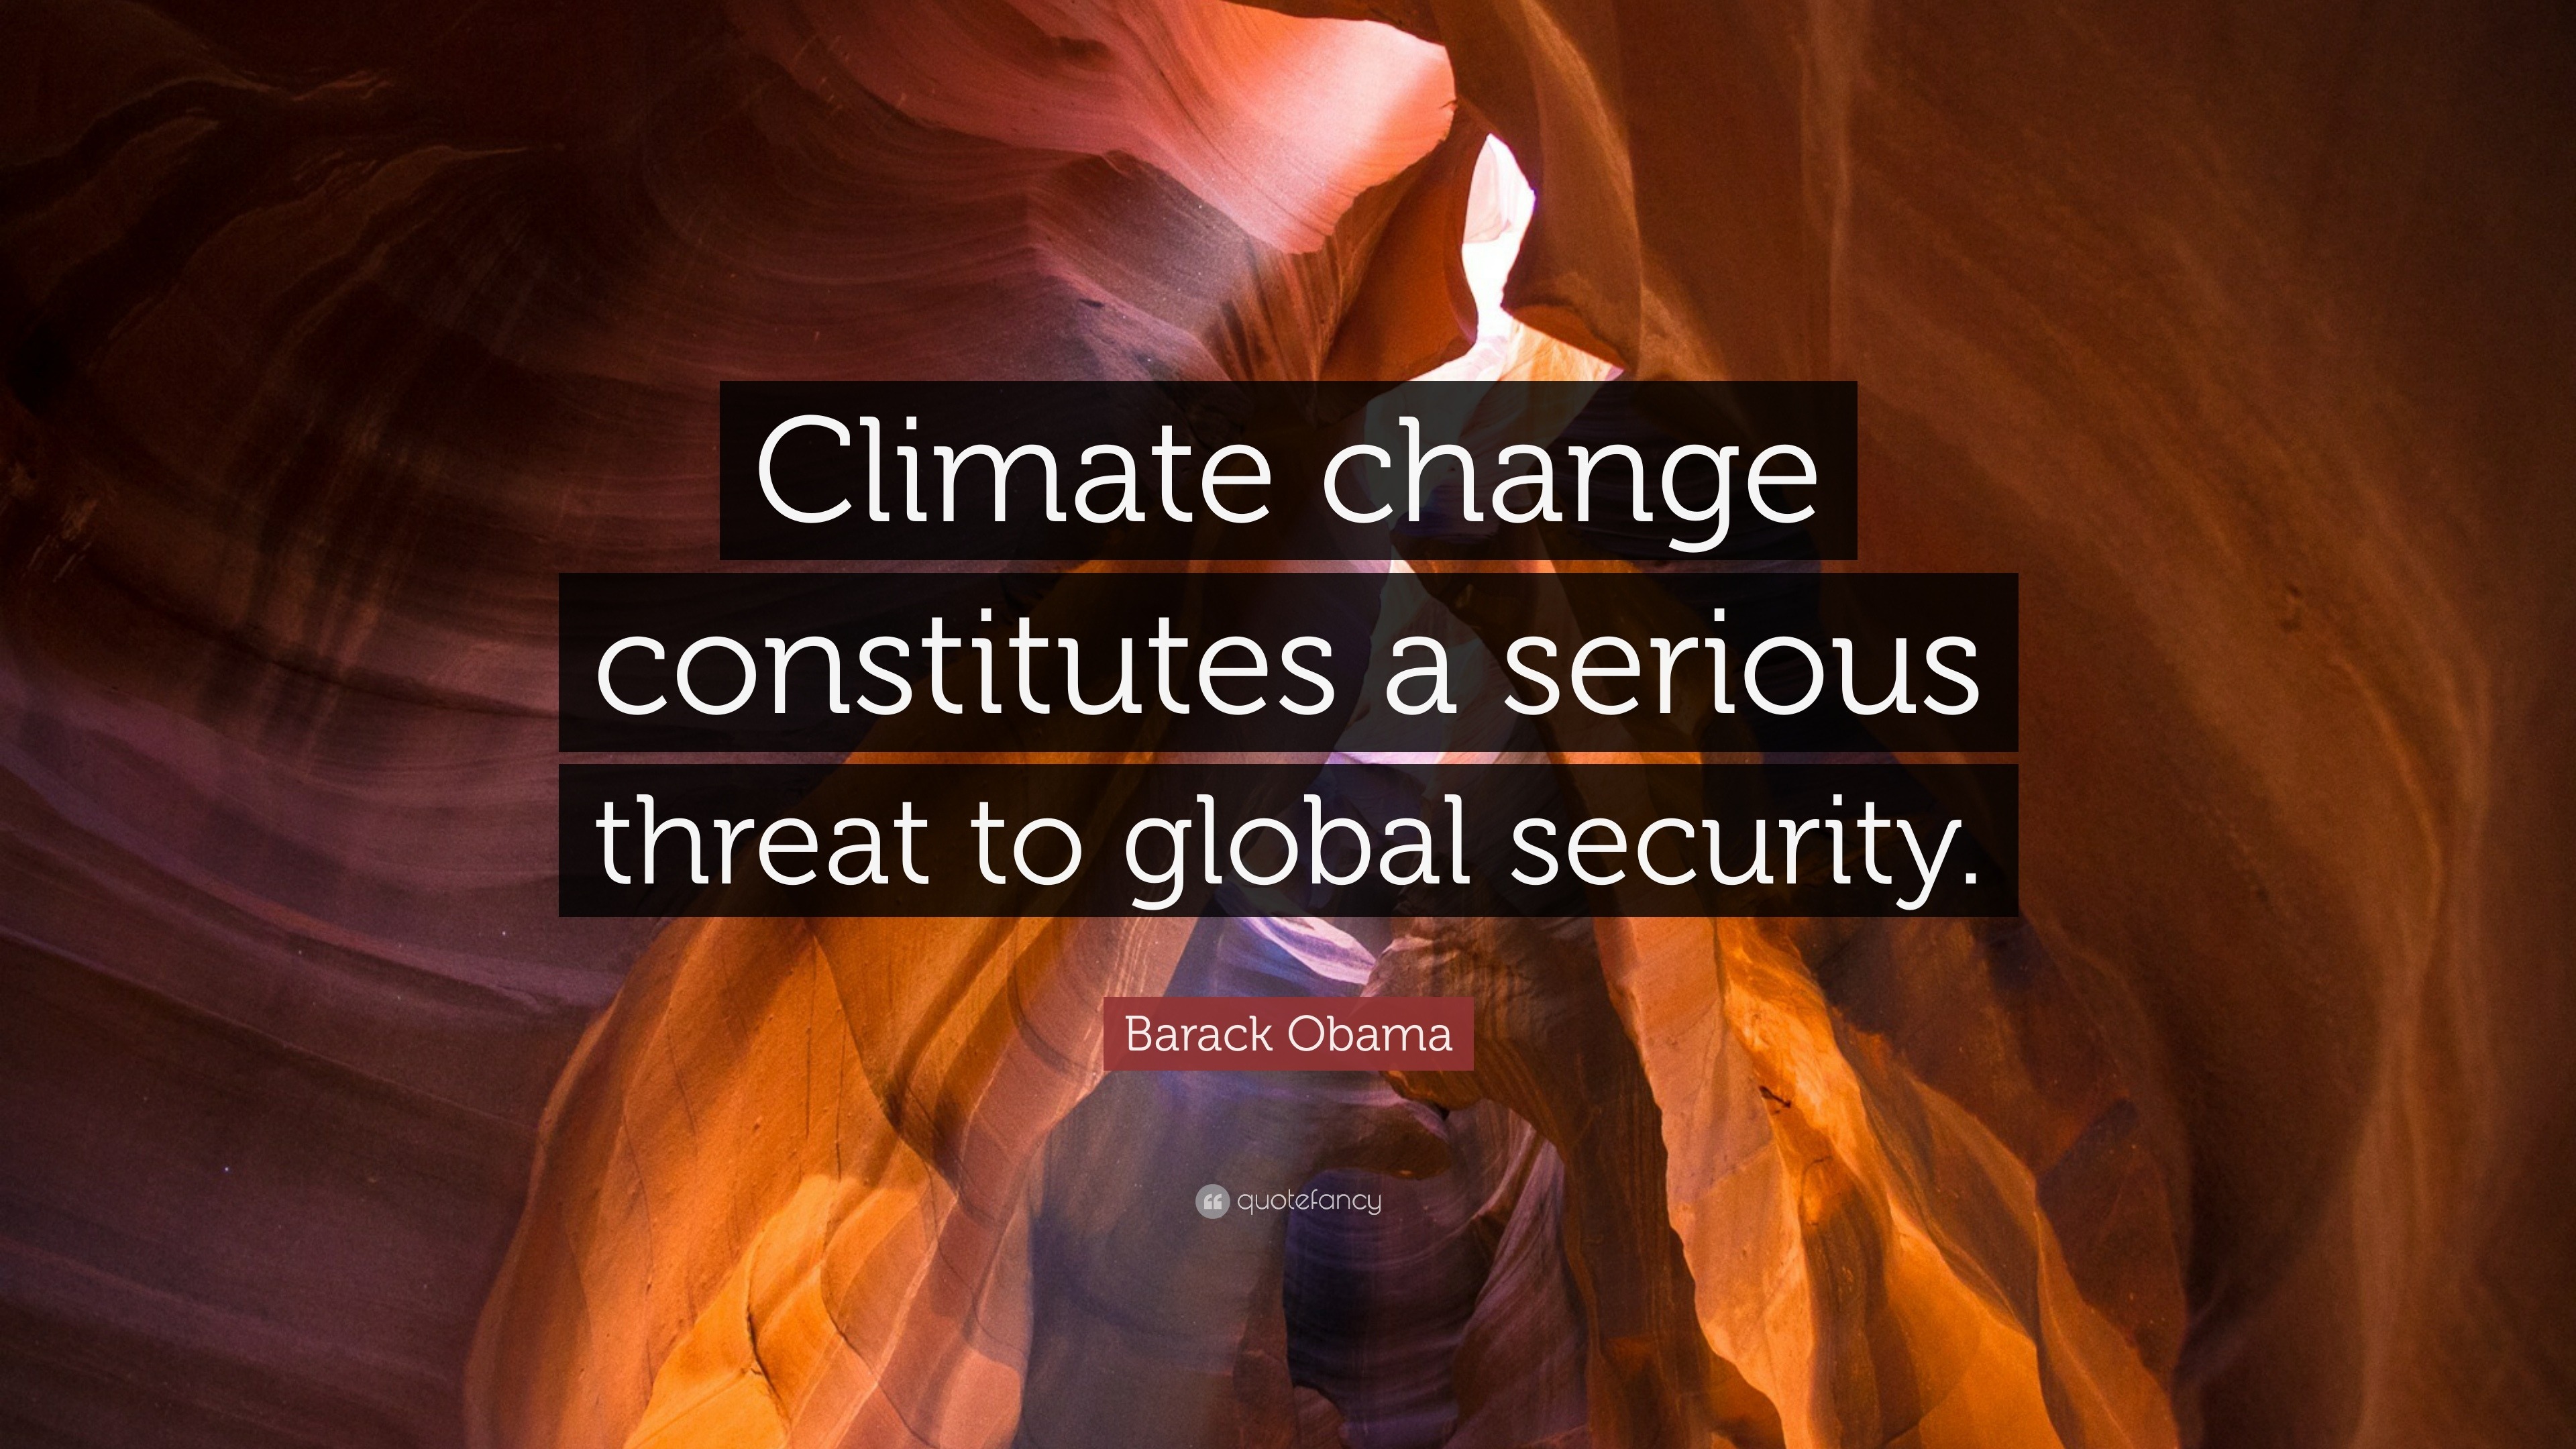 Barack Obama Quote: “Climate change constitutes a serious threat to ...